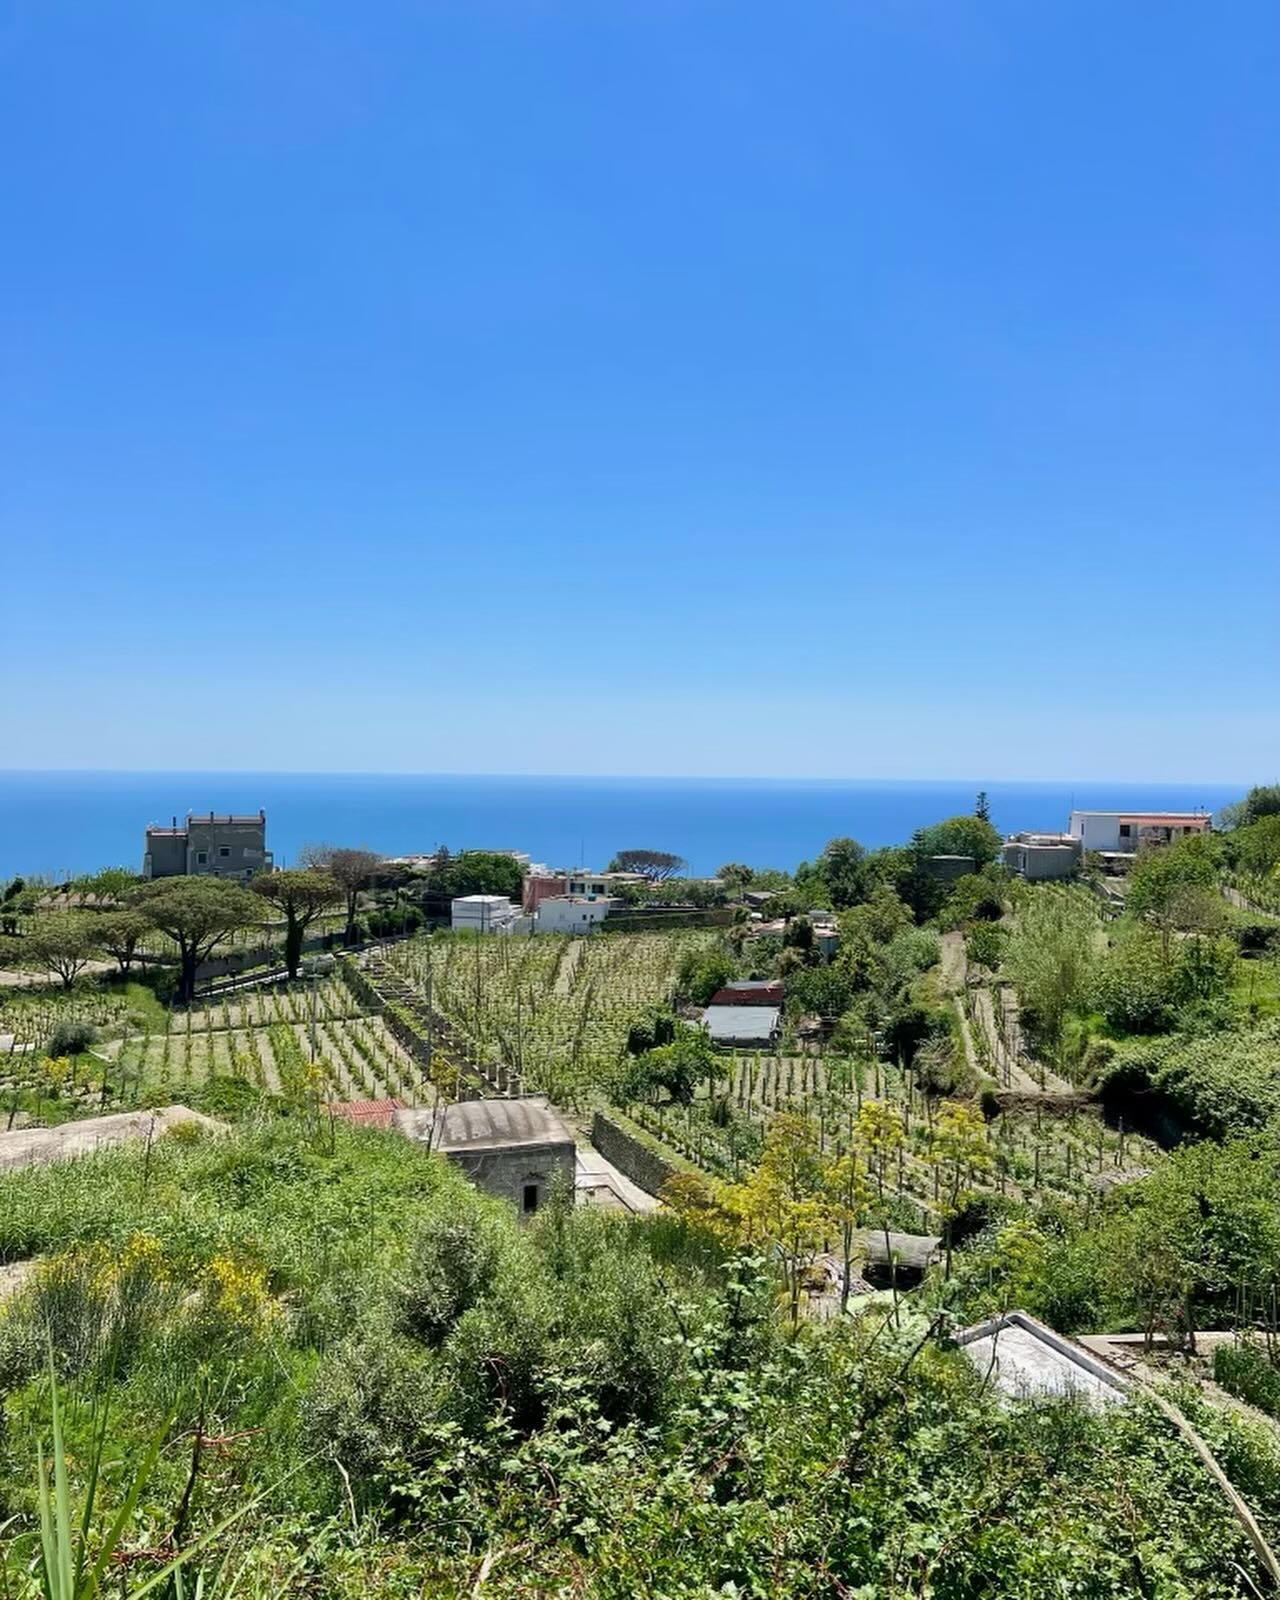 We were welcomed to this enchanting island by a dinner with Federica, Pasquale and their two sons Matteo and Giovanni. Matteo is moving to Miami next week to be senior pizzaiolo at Pommarola. 

Their winemaking is a whole island affair. The largest s